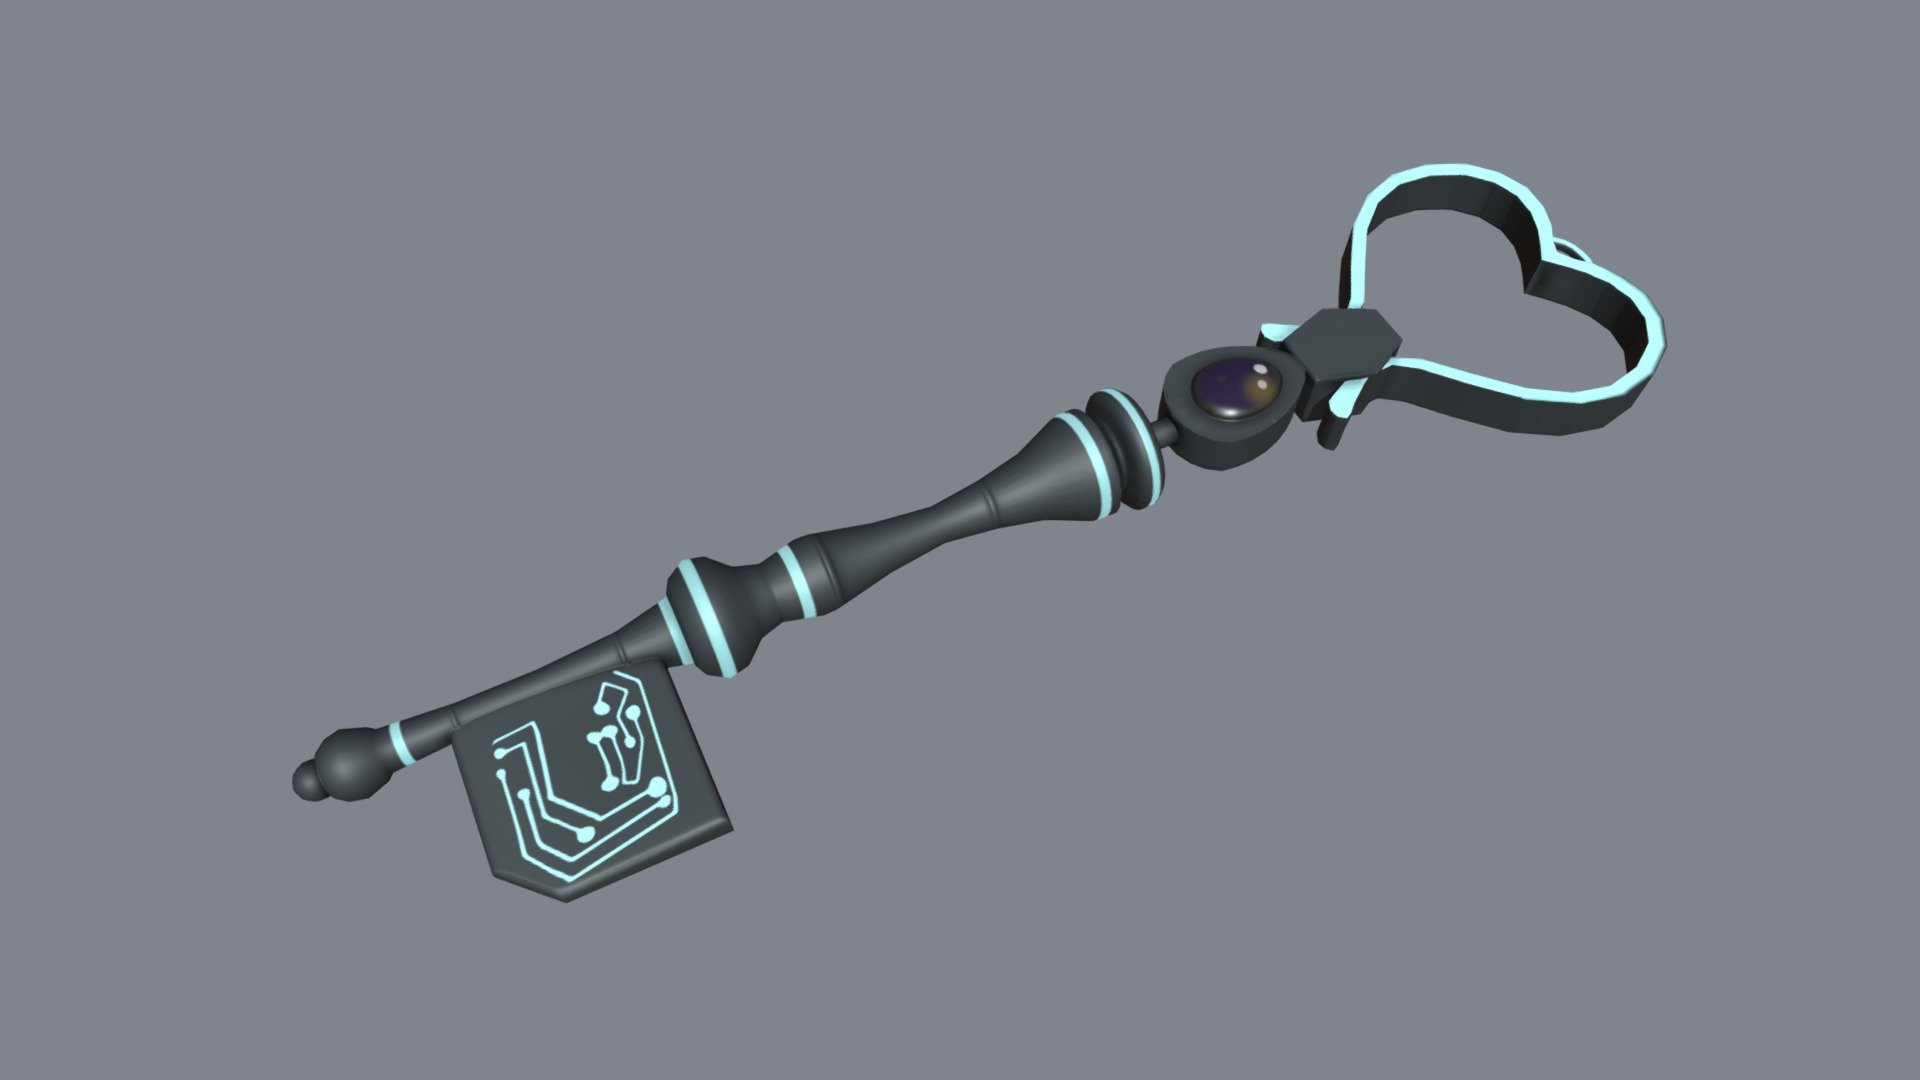 This magic cartoon key was made in blender after a big break. 
Textures were made in Substance Painter 3d model